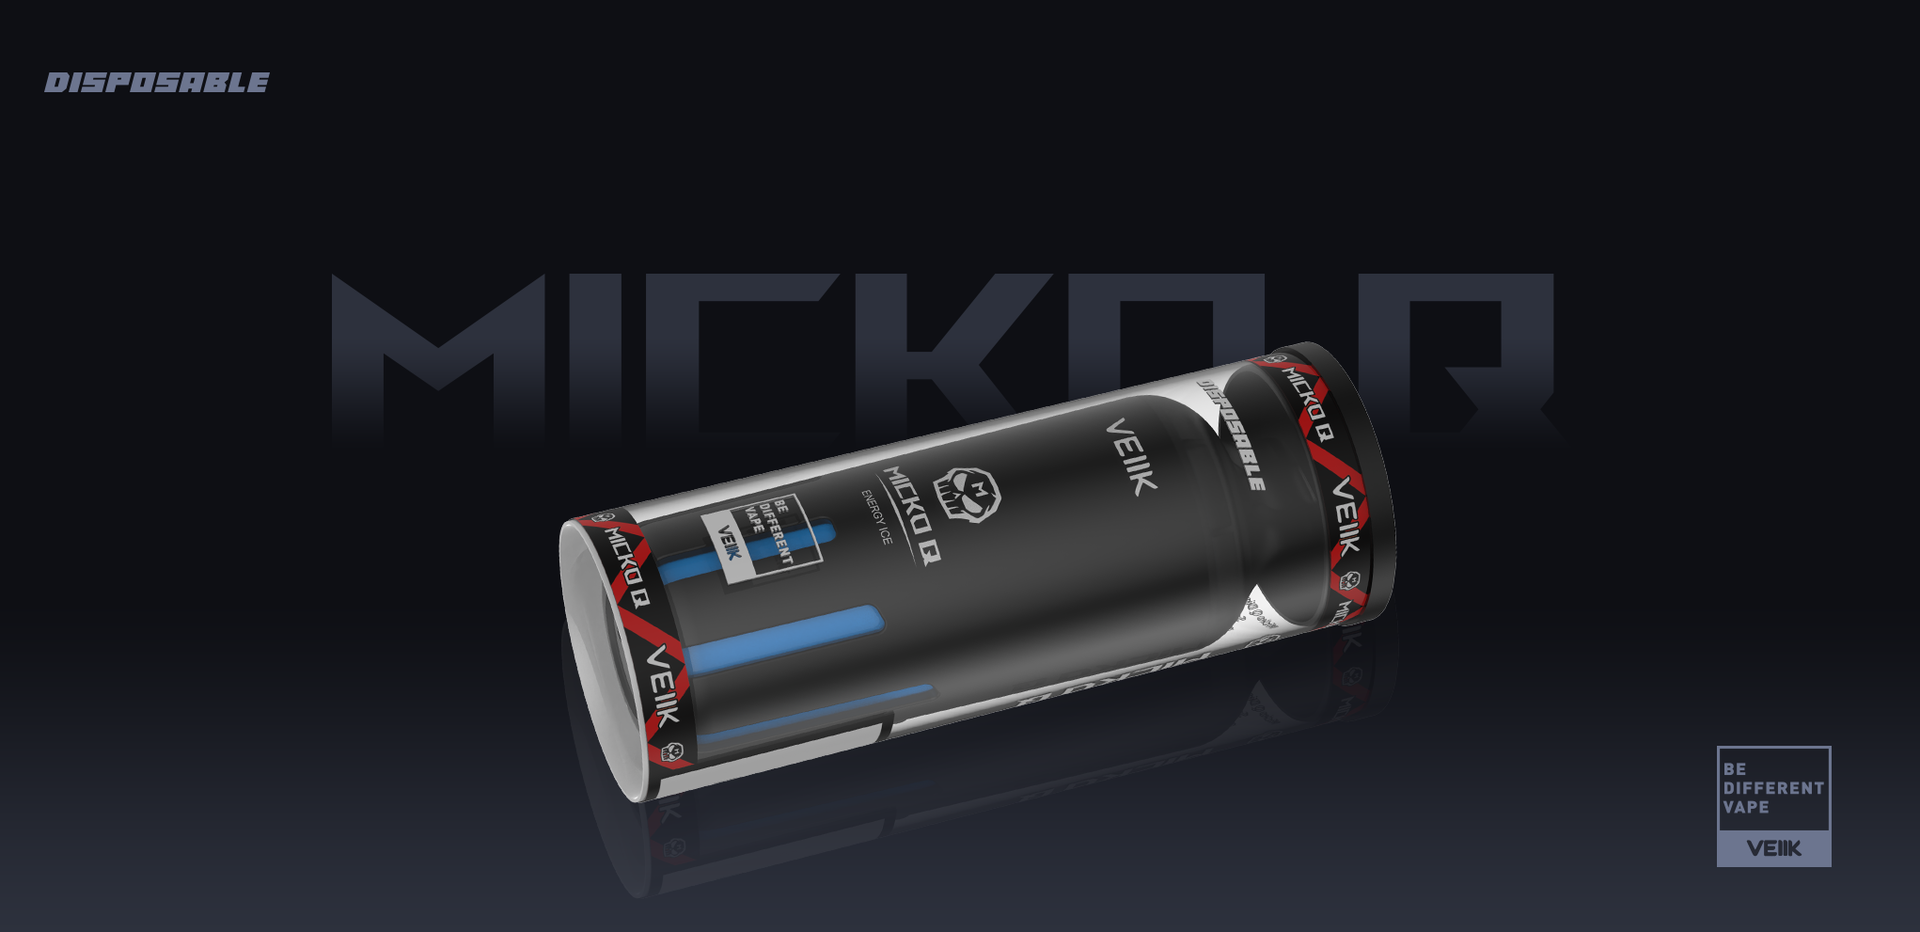 VEIIK easy to use e cigarette where to buy for sale high-end personal vaporizer